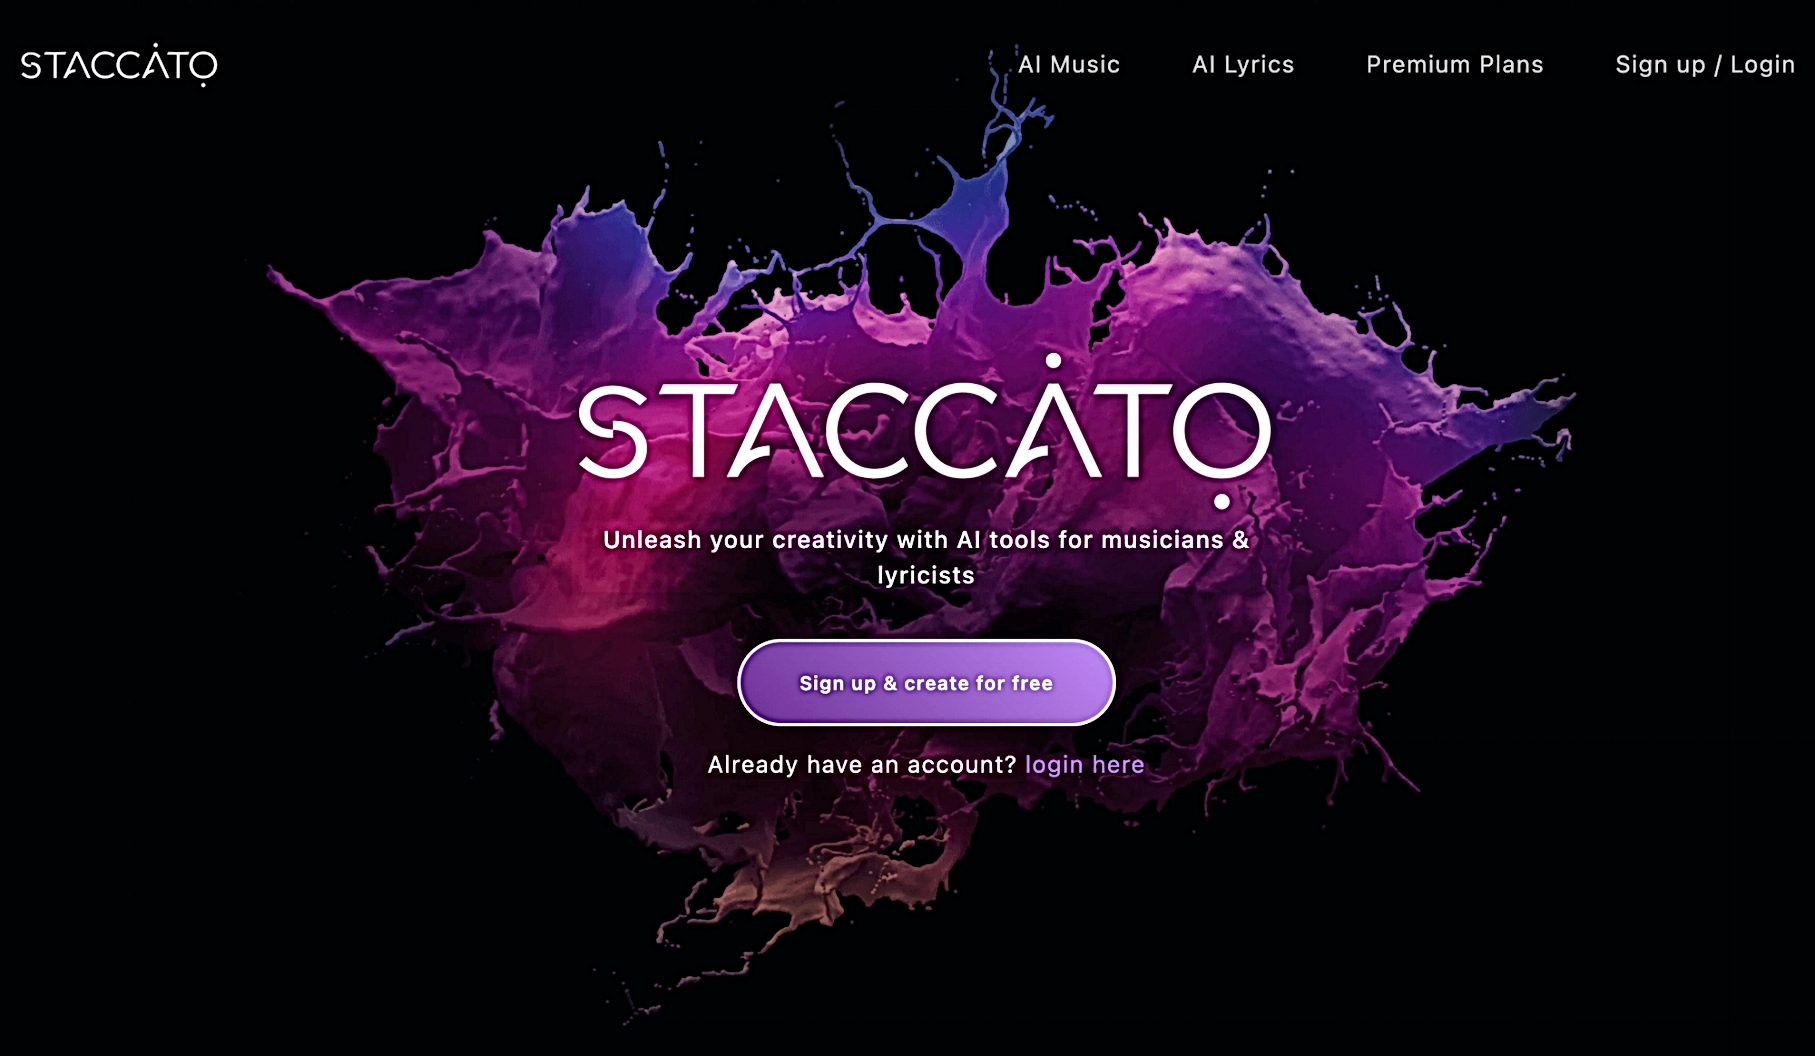 Staccato featured